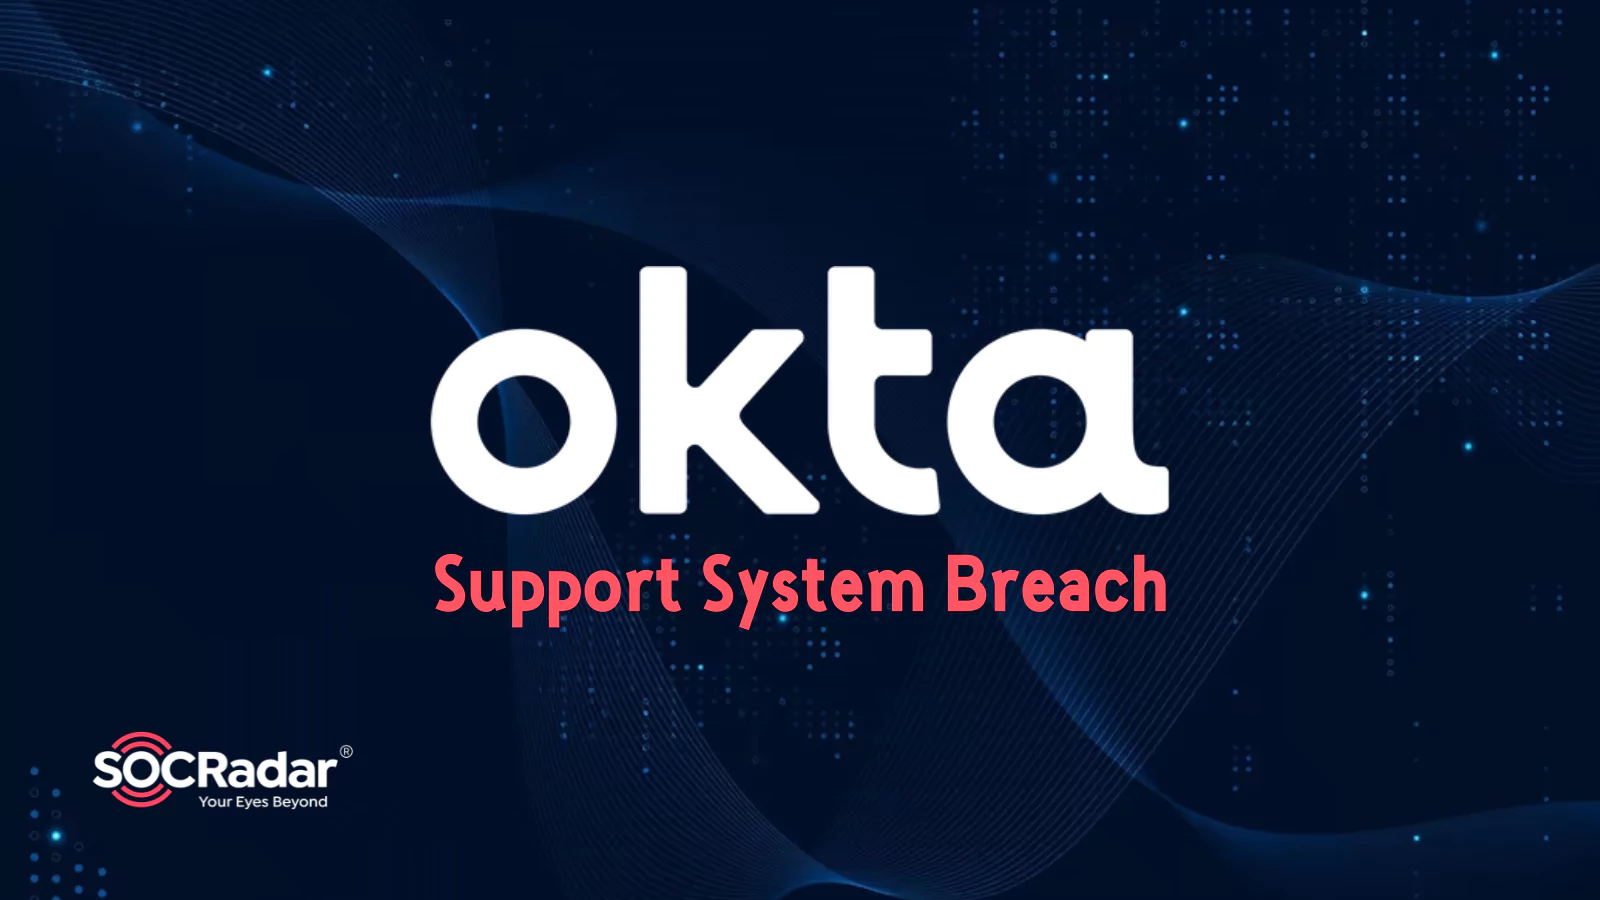 SOCRadar® Cyber Intelligence Inc. | Security Breach in Okta Support System Continues Sparking Concerns: Cloudflare and 1Password Share Disclosures